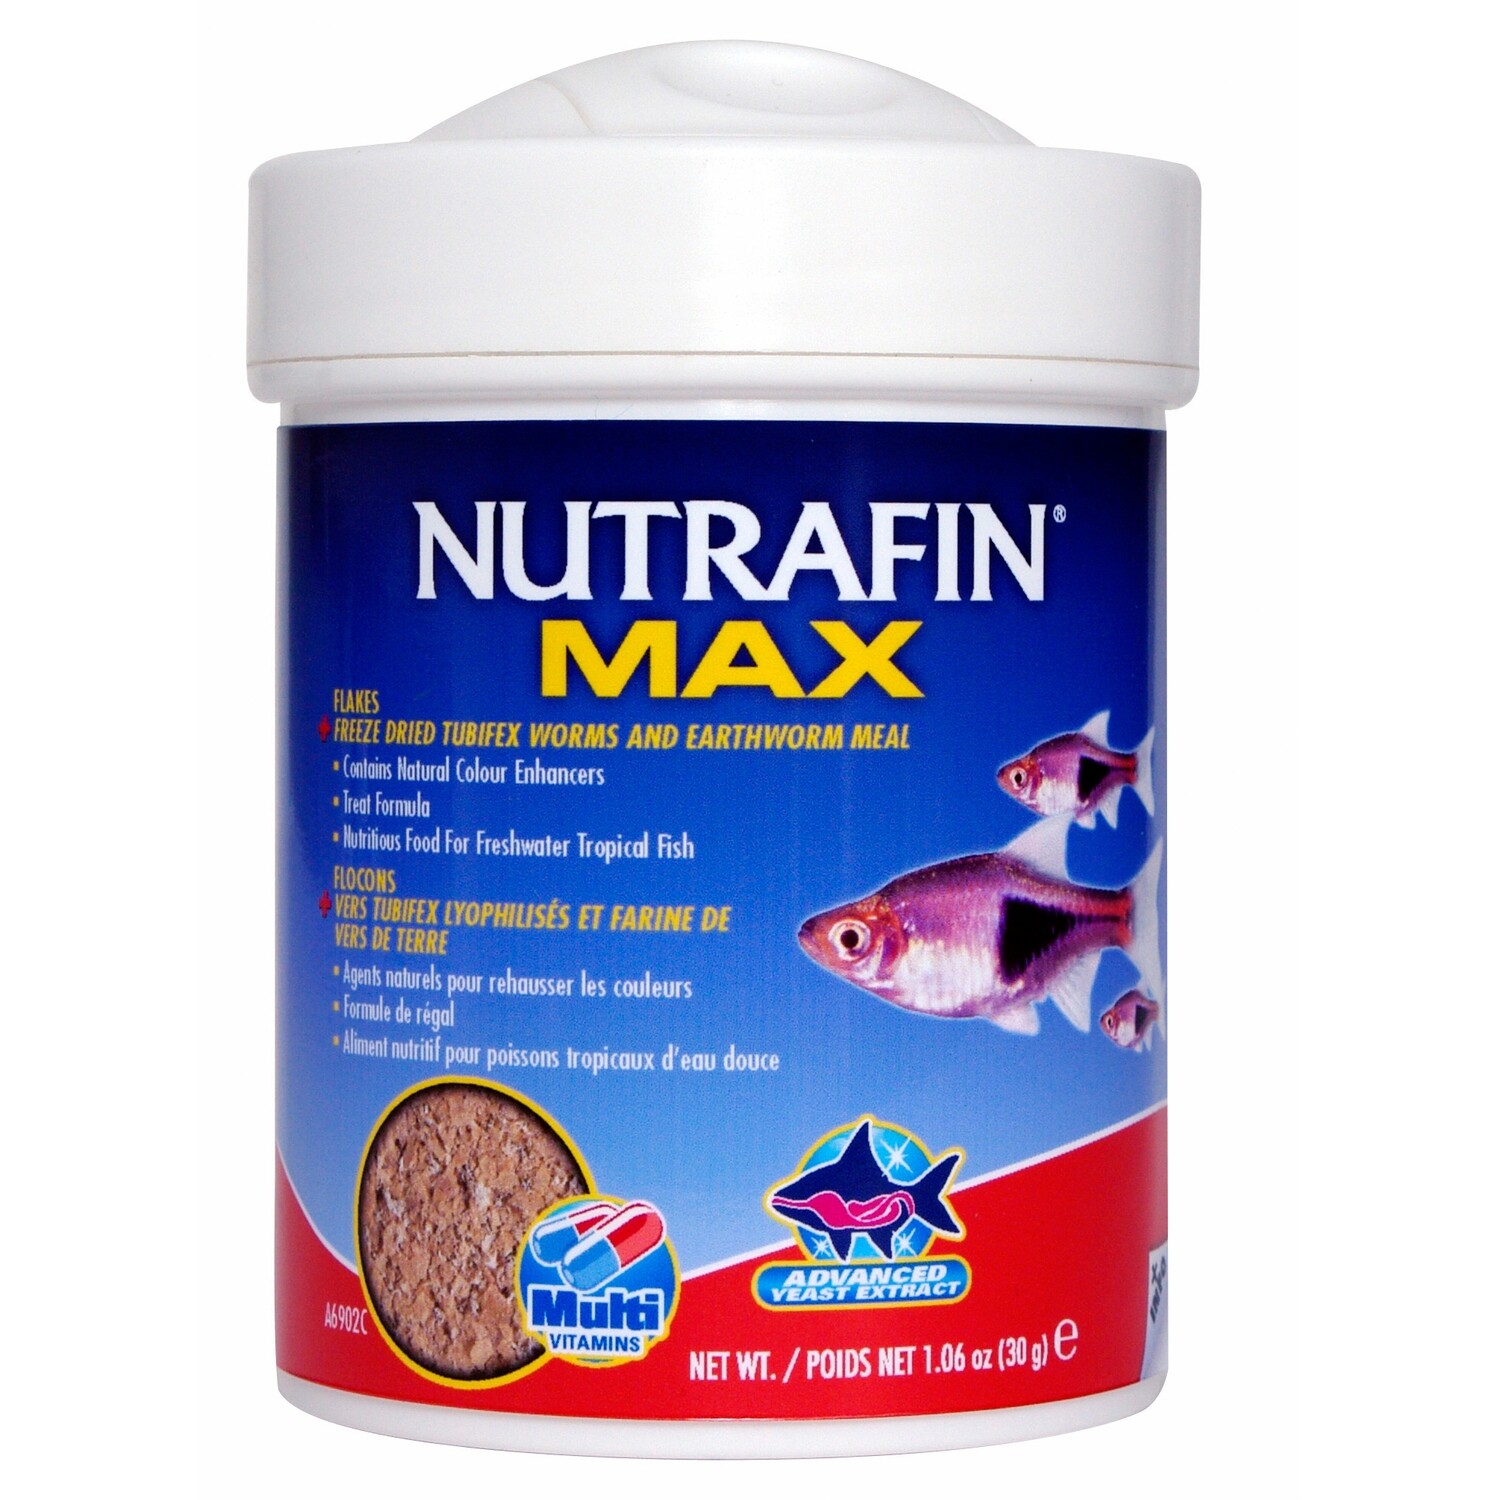 Nutrafin Max Flakes + Freeze Dried Tubifex Worms and Earthworm Meal 30 g (1.06 oz)